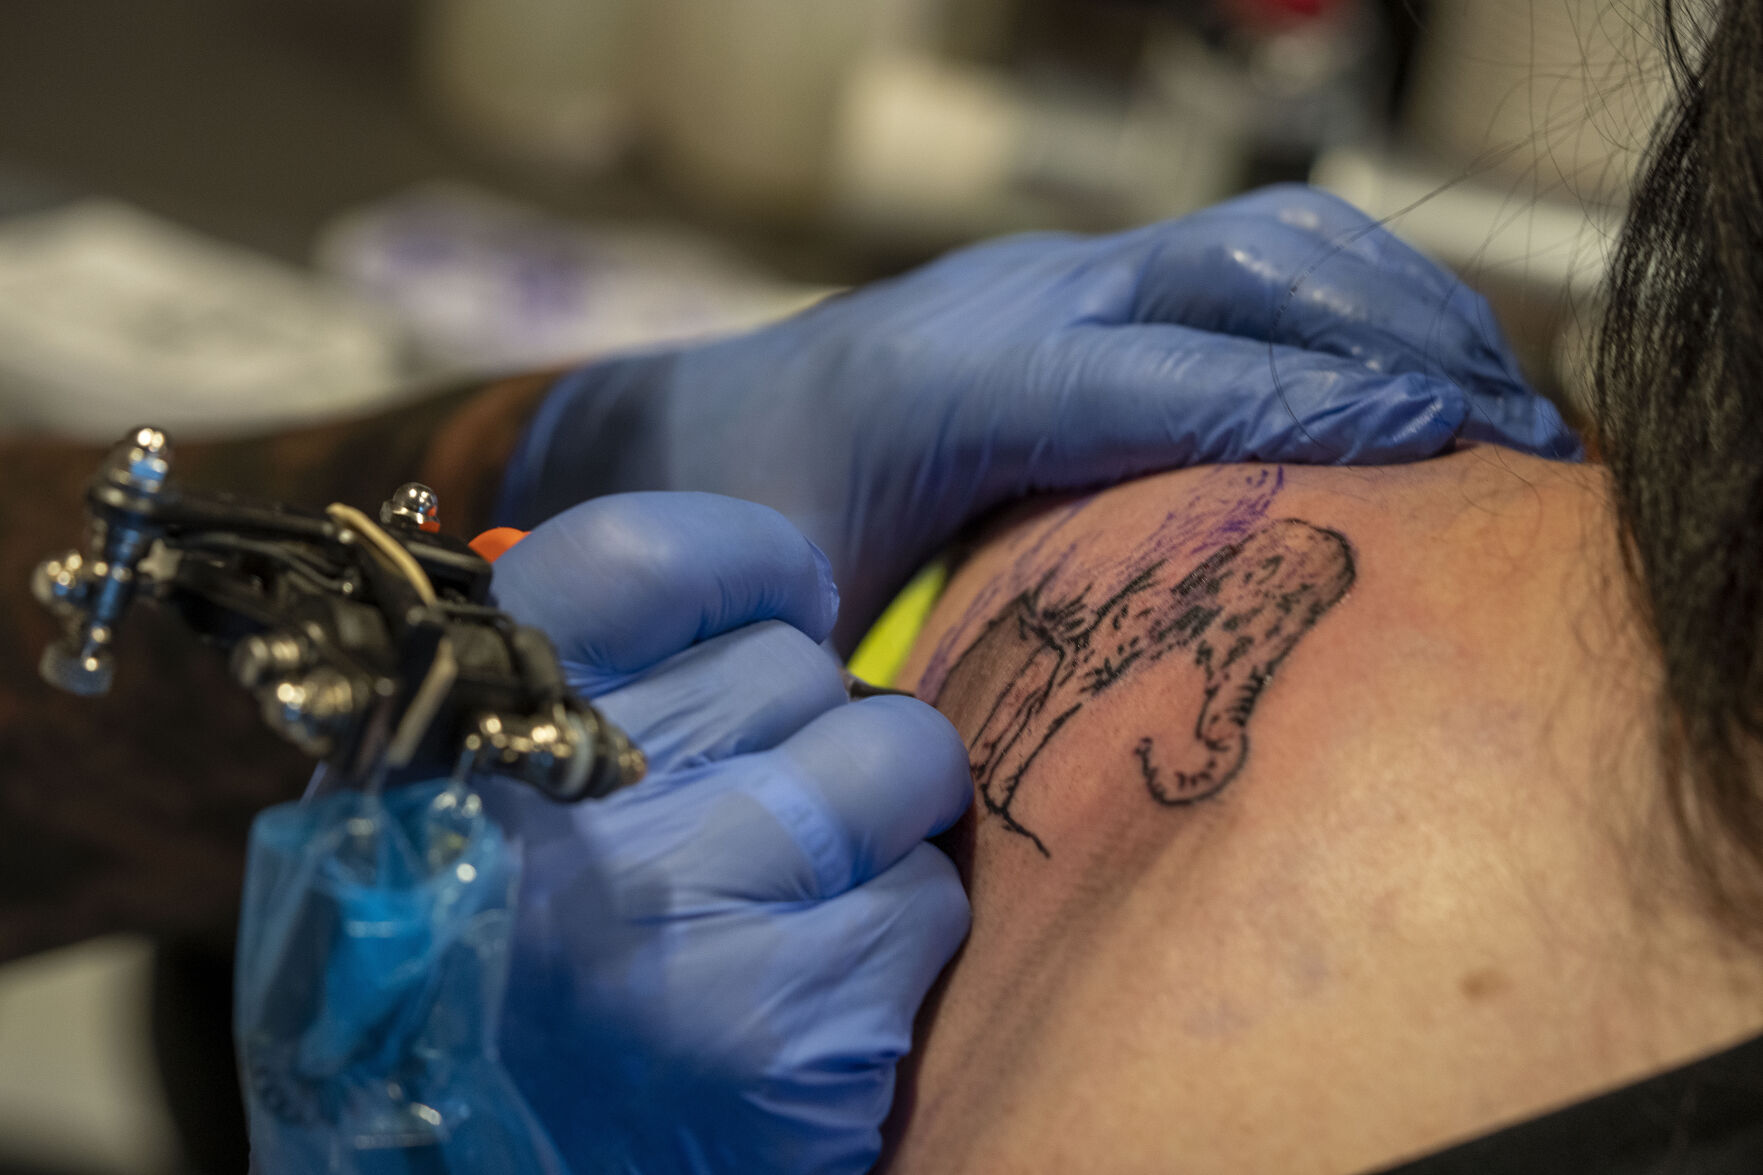 New rules for tattoo artists create confusion ahead of EU pigment ban -  DutchNews.nl